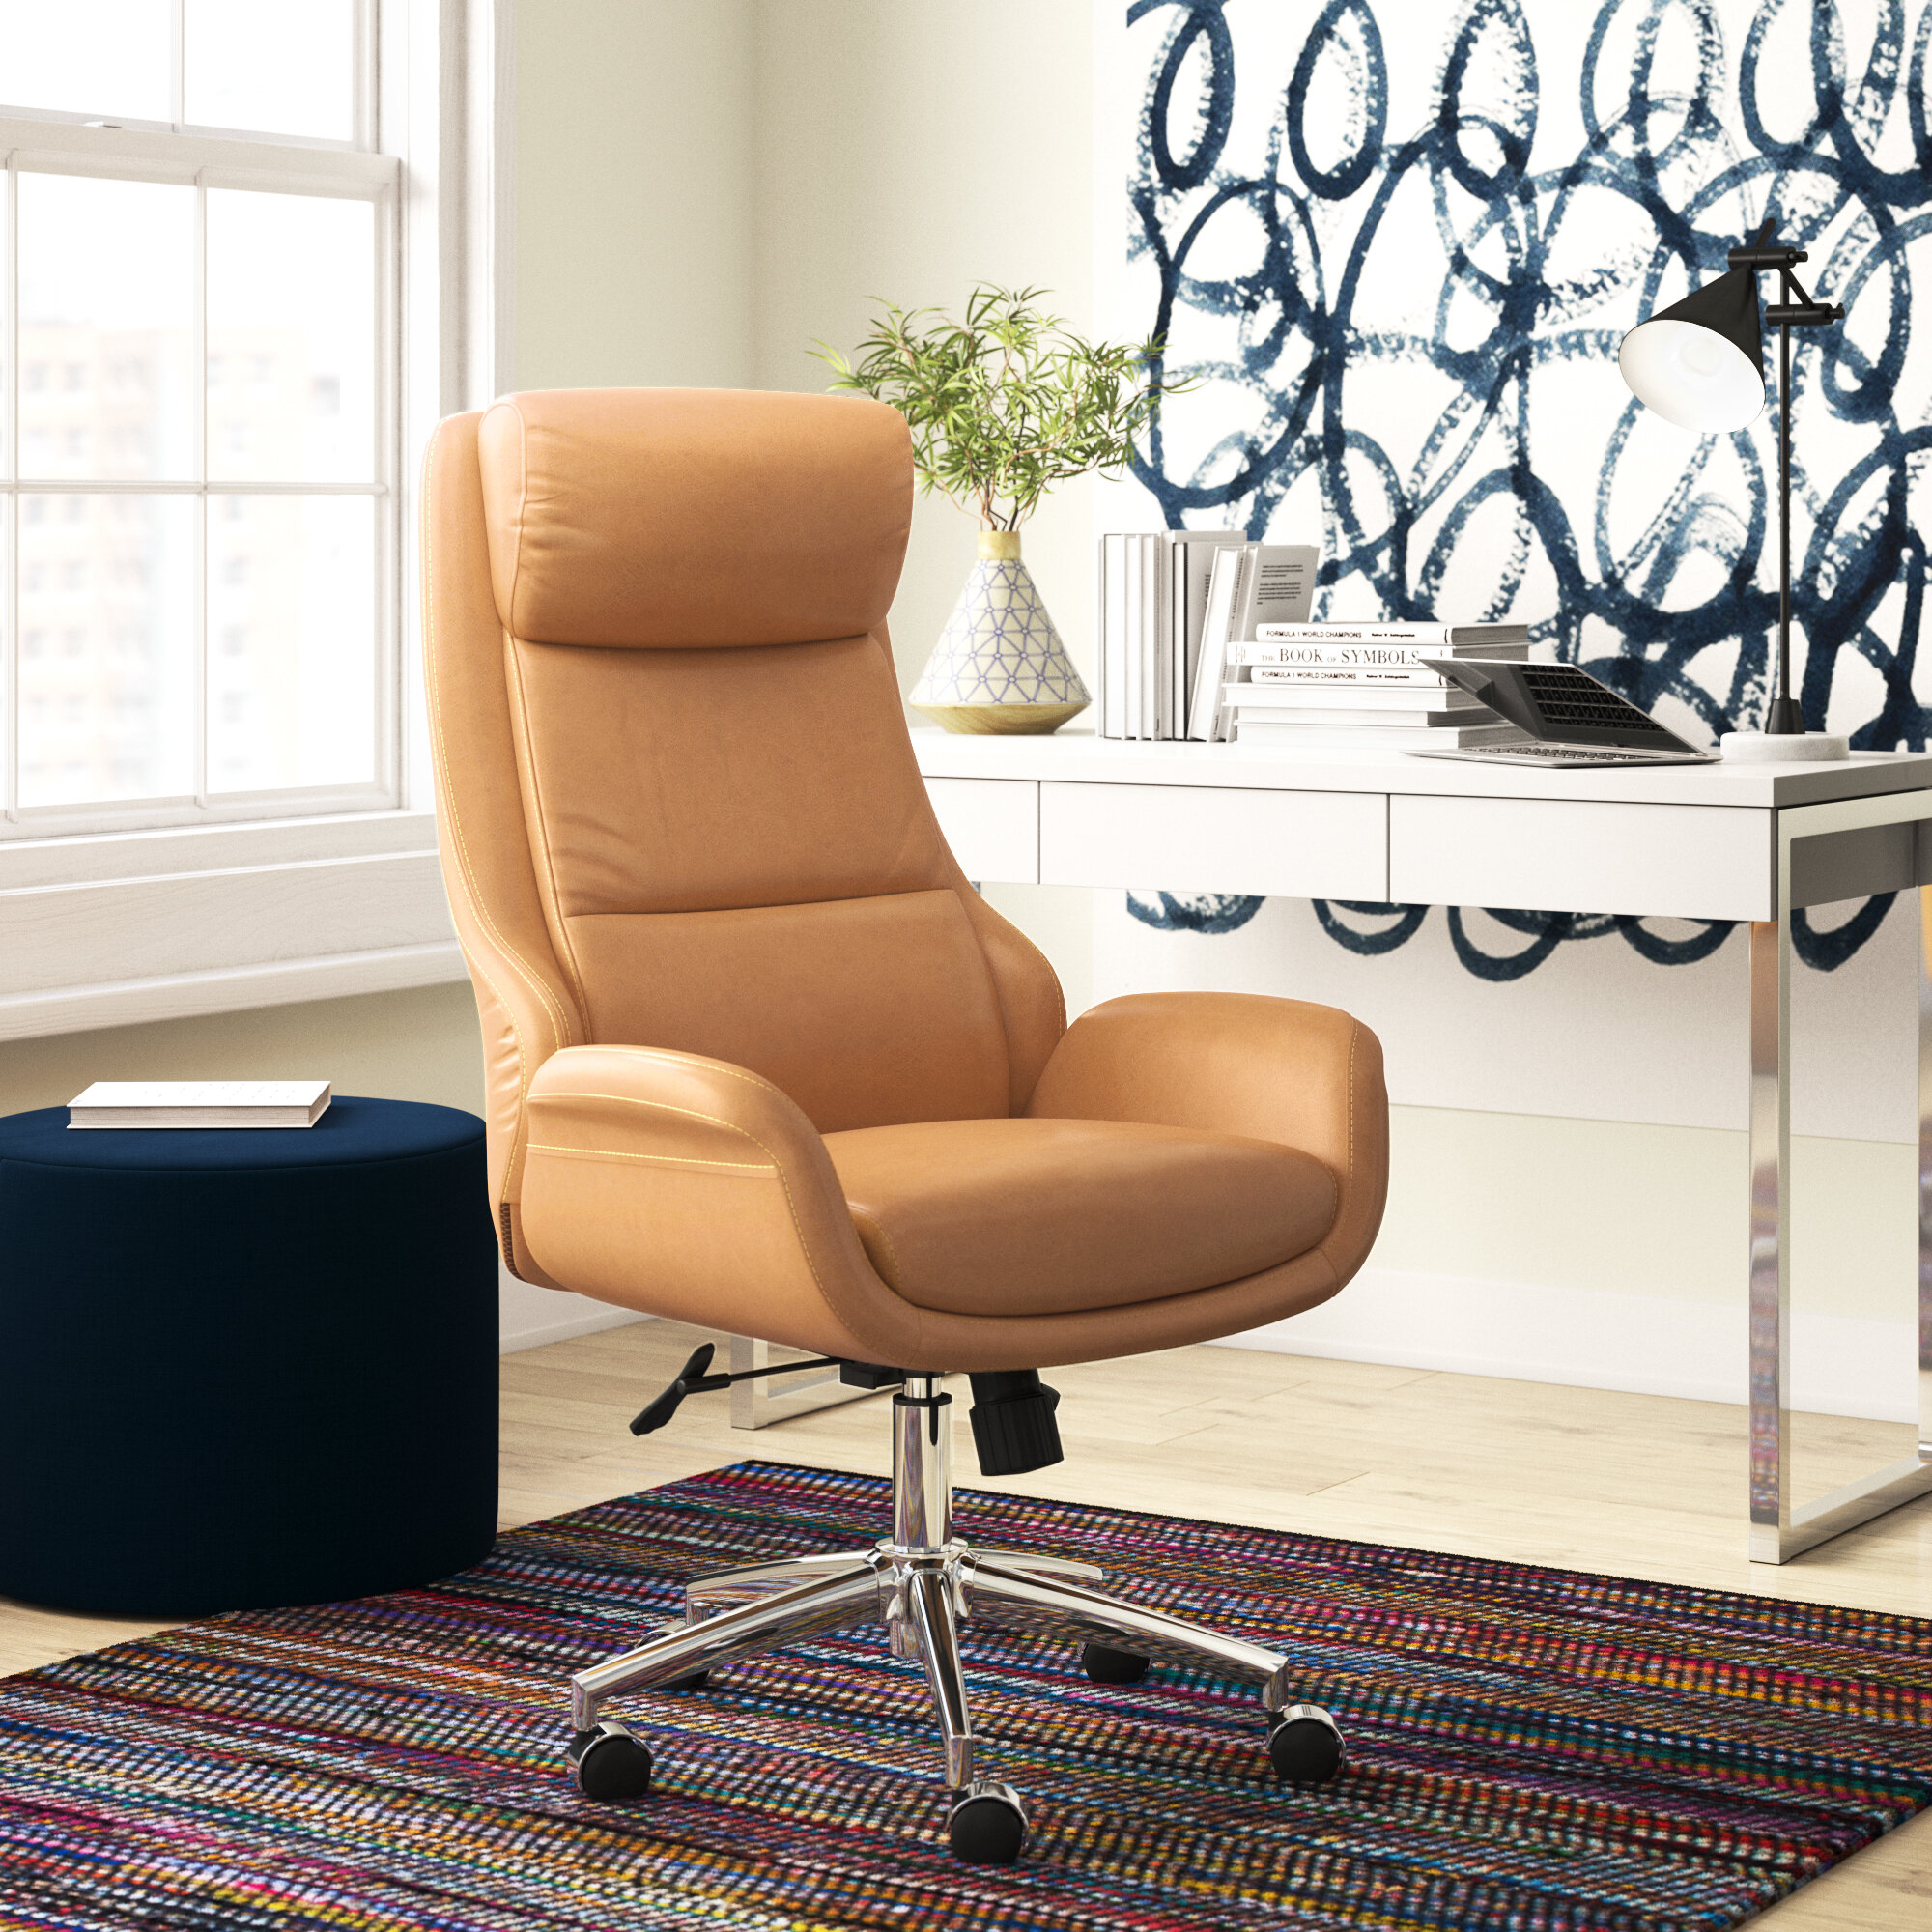 Top 92+ imagen faux leather office chair